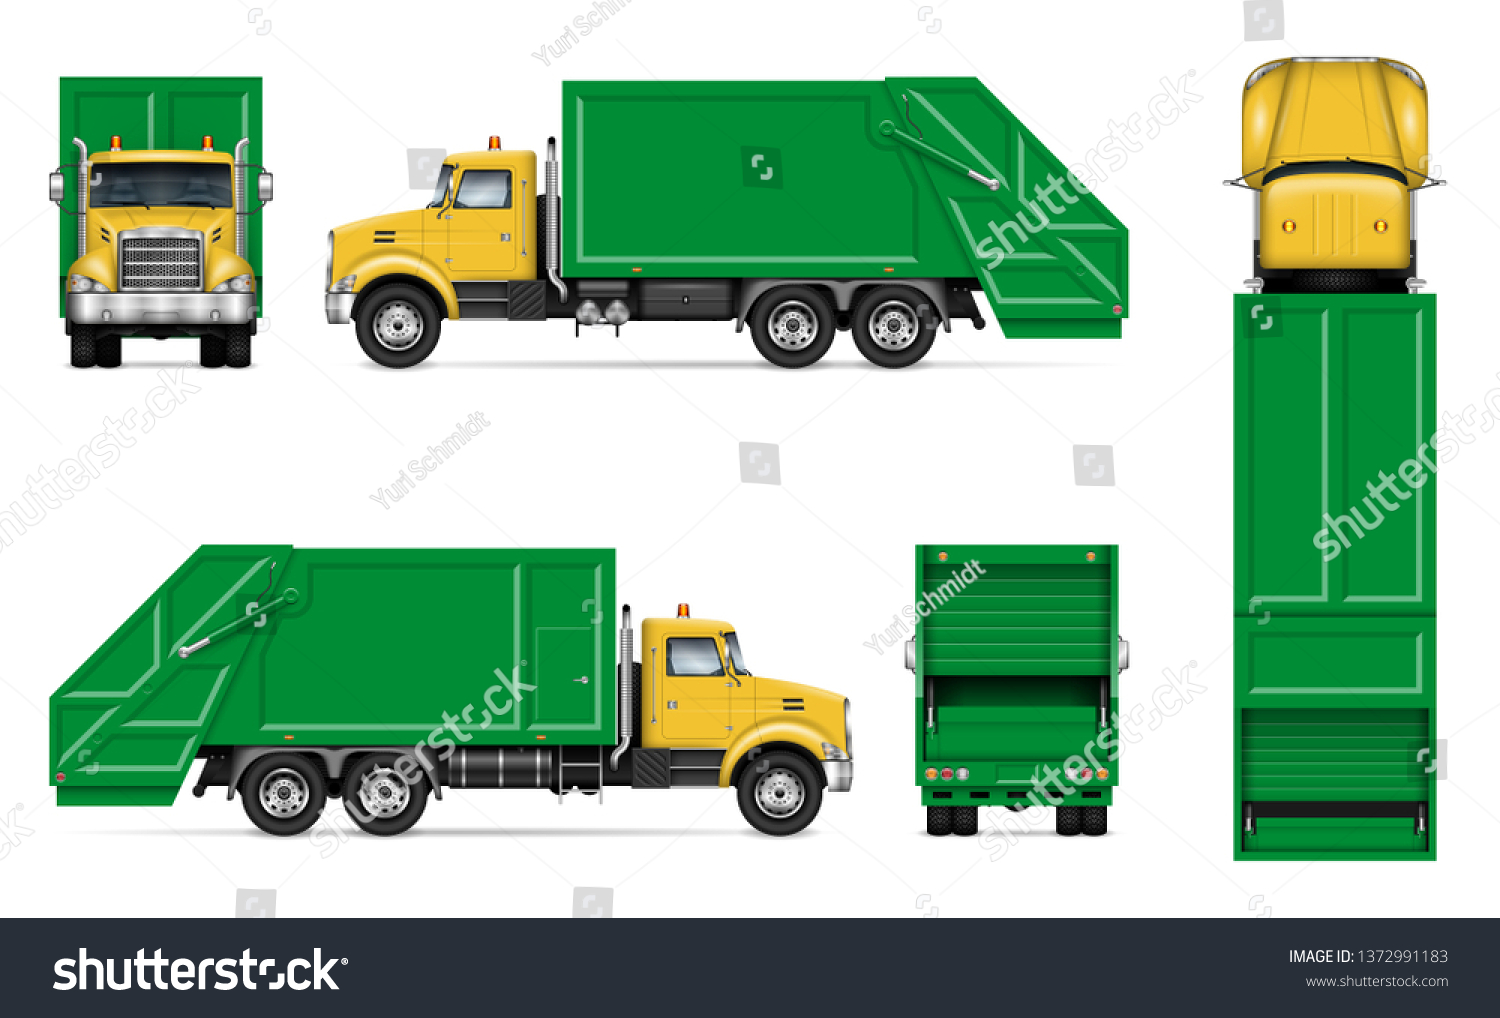 SVG of Realistic green garbage truck vector mockup. Isolated template of dump lorry on white background for vehicle branding, corporate identity, easy to editing and recolor svg